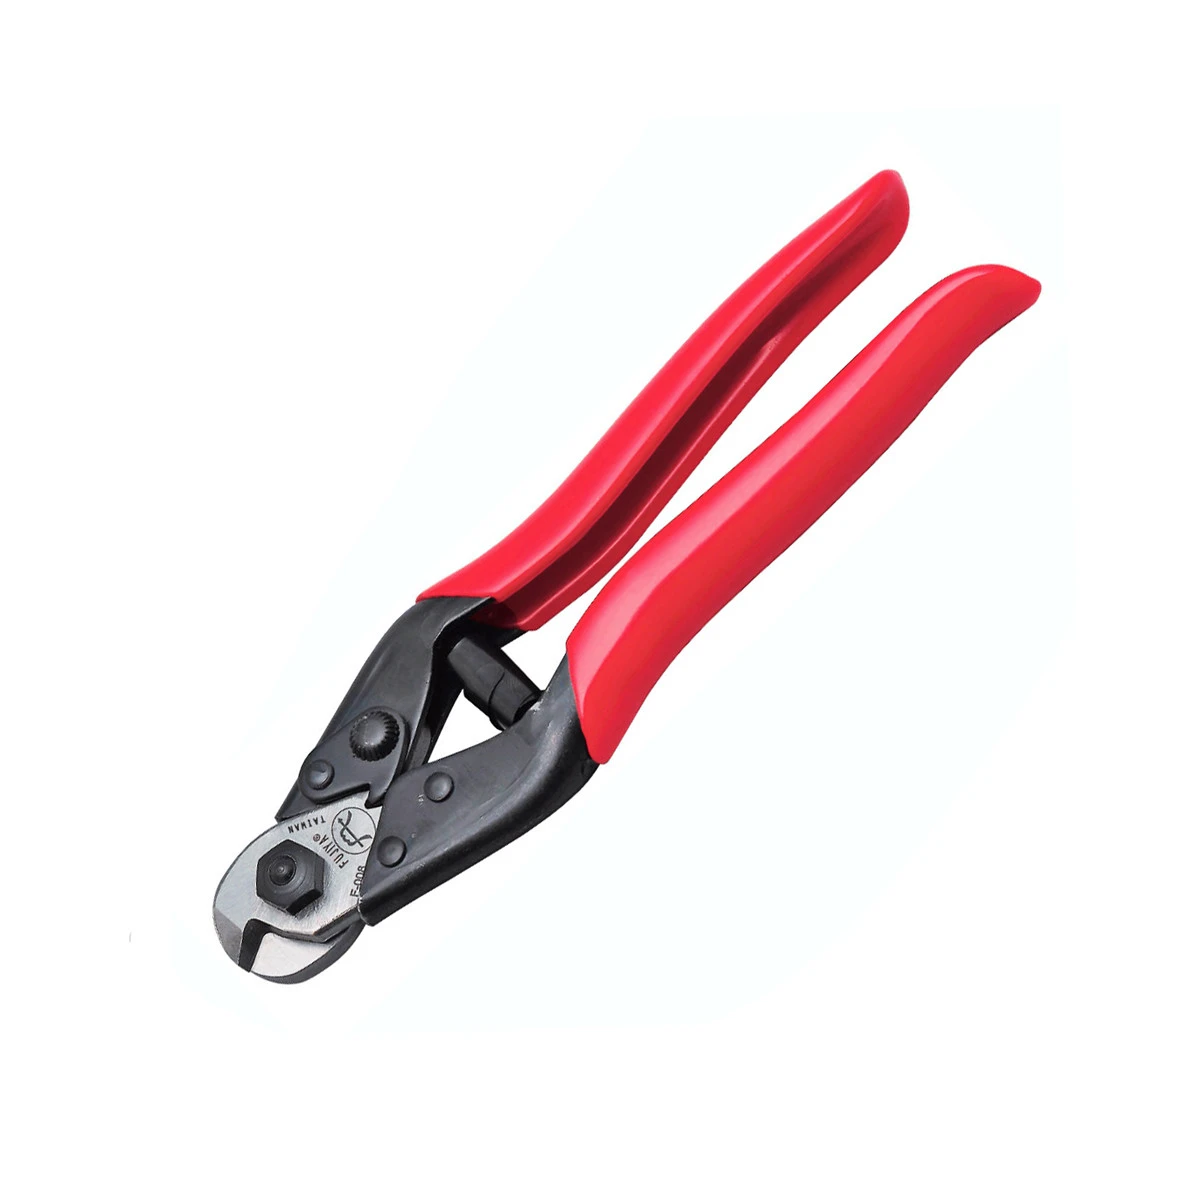 Taiwan Effort Saving Steel Rope Cutter with Special Springs l SK-5 blade l SAE1008 carbon steel body l carbon steel springs l